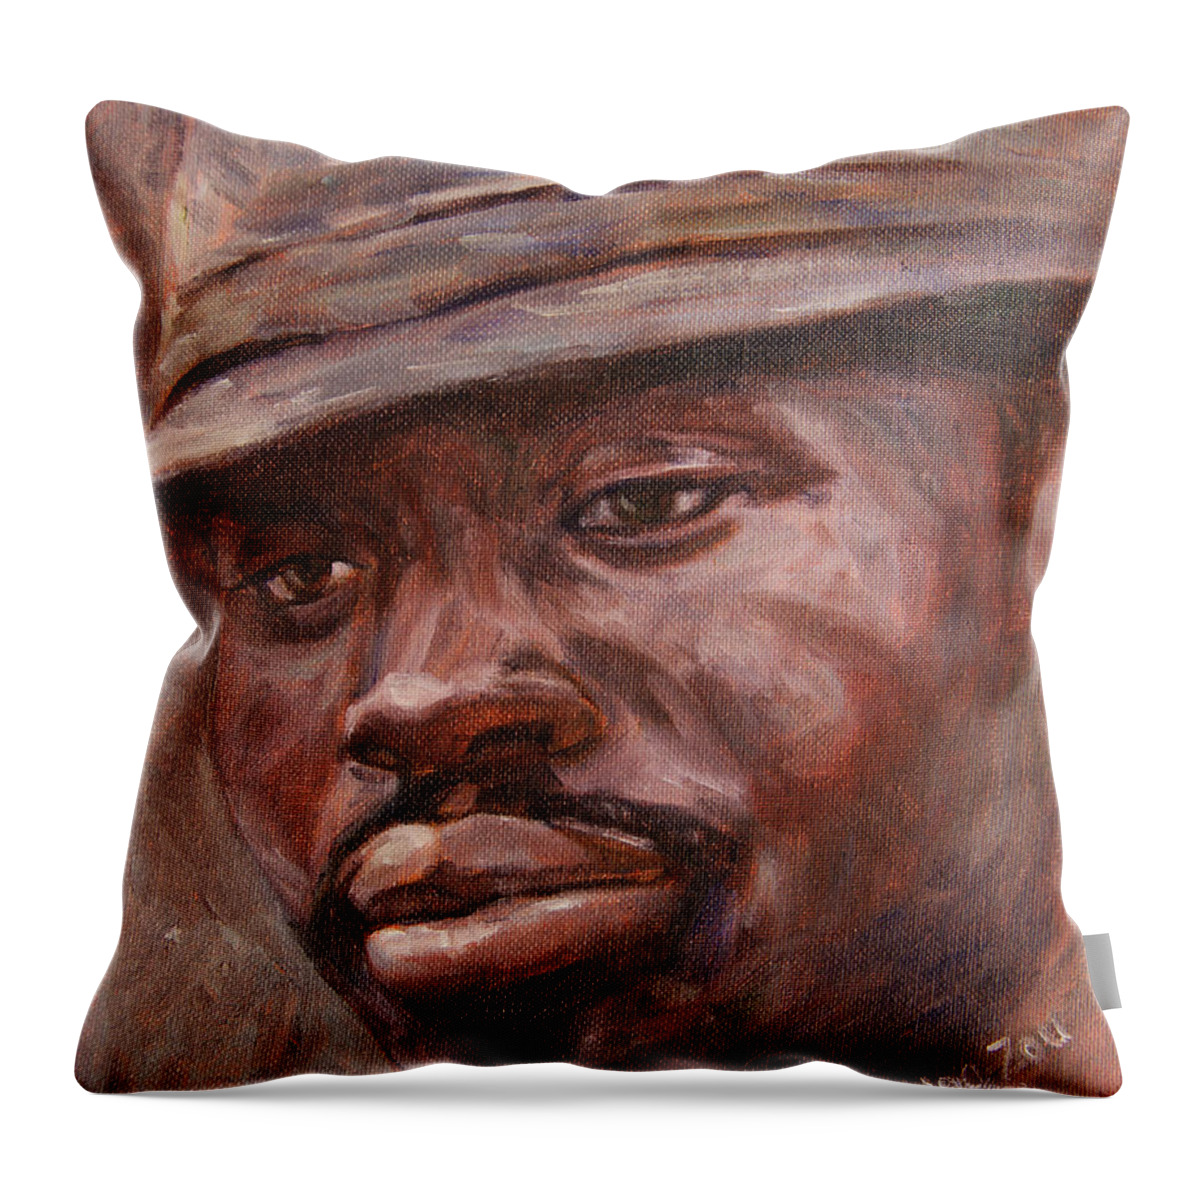 Mr Cool Hat Throw Pillow featuring the painting Mr Cool Hat by Xueling Zou